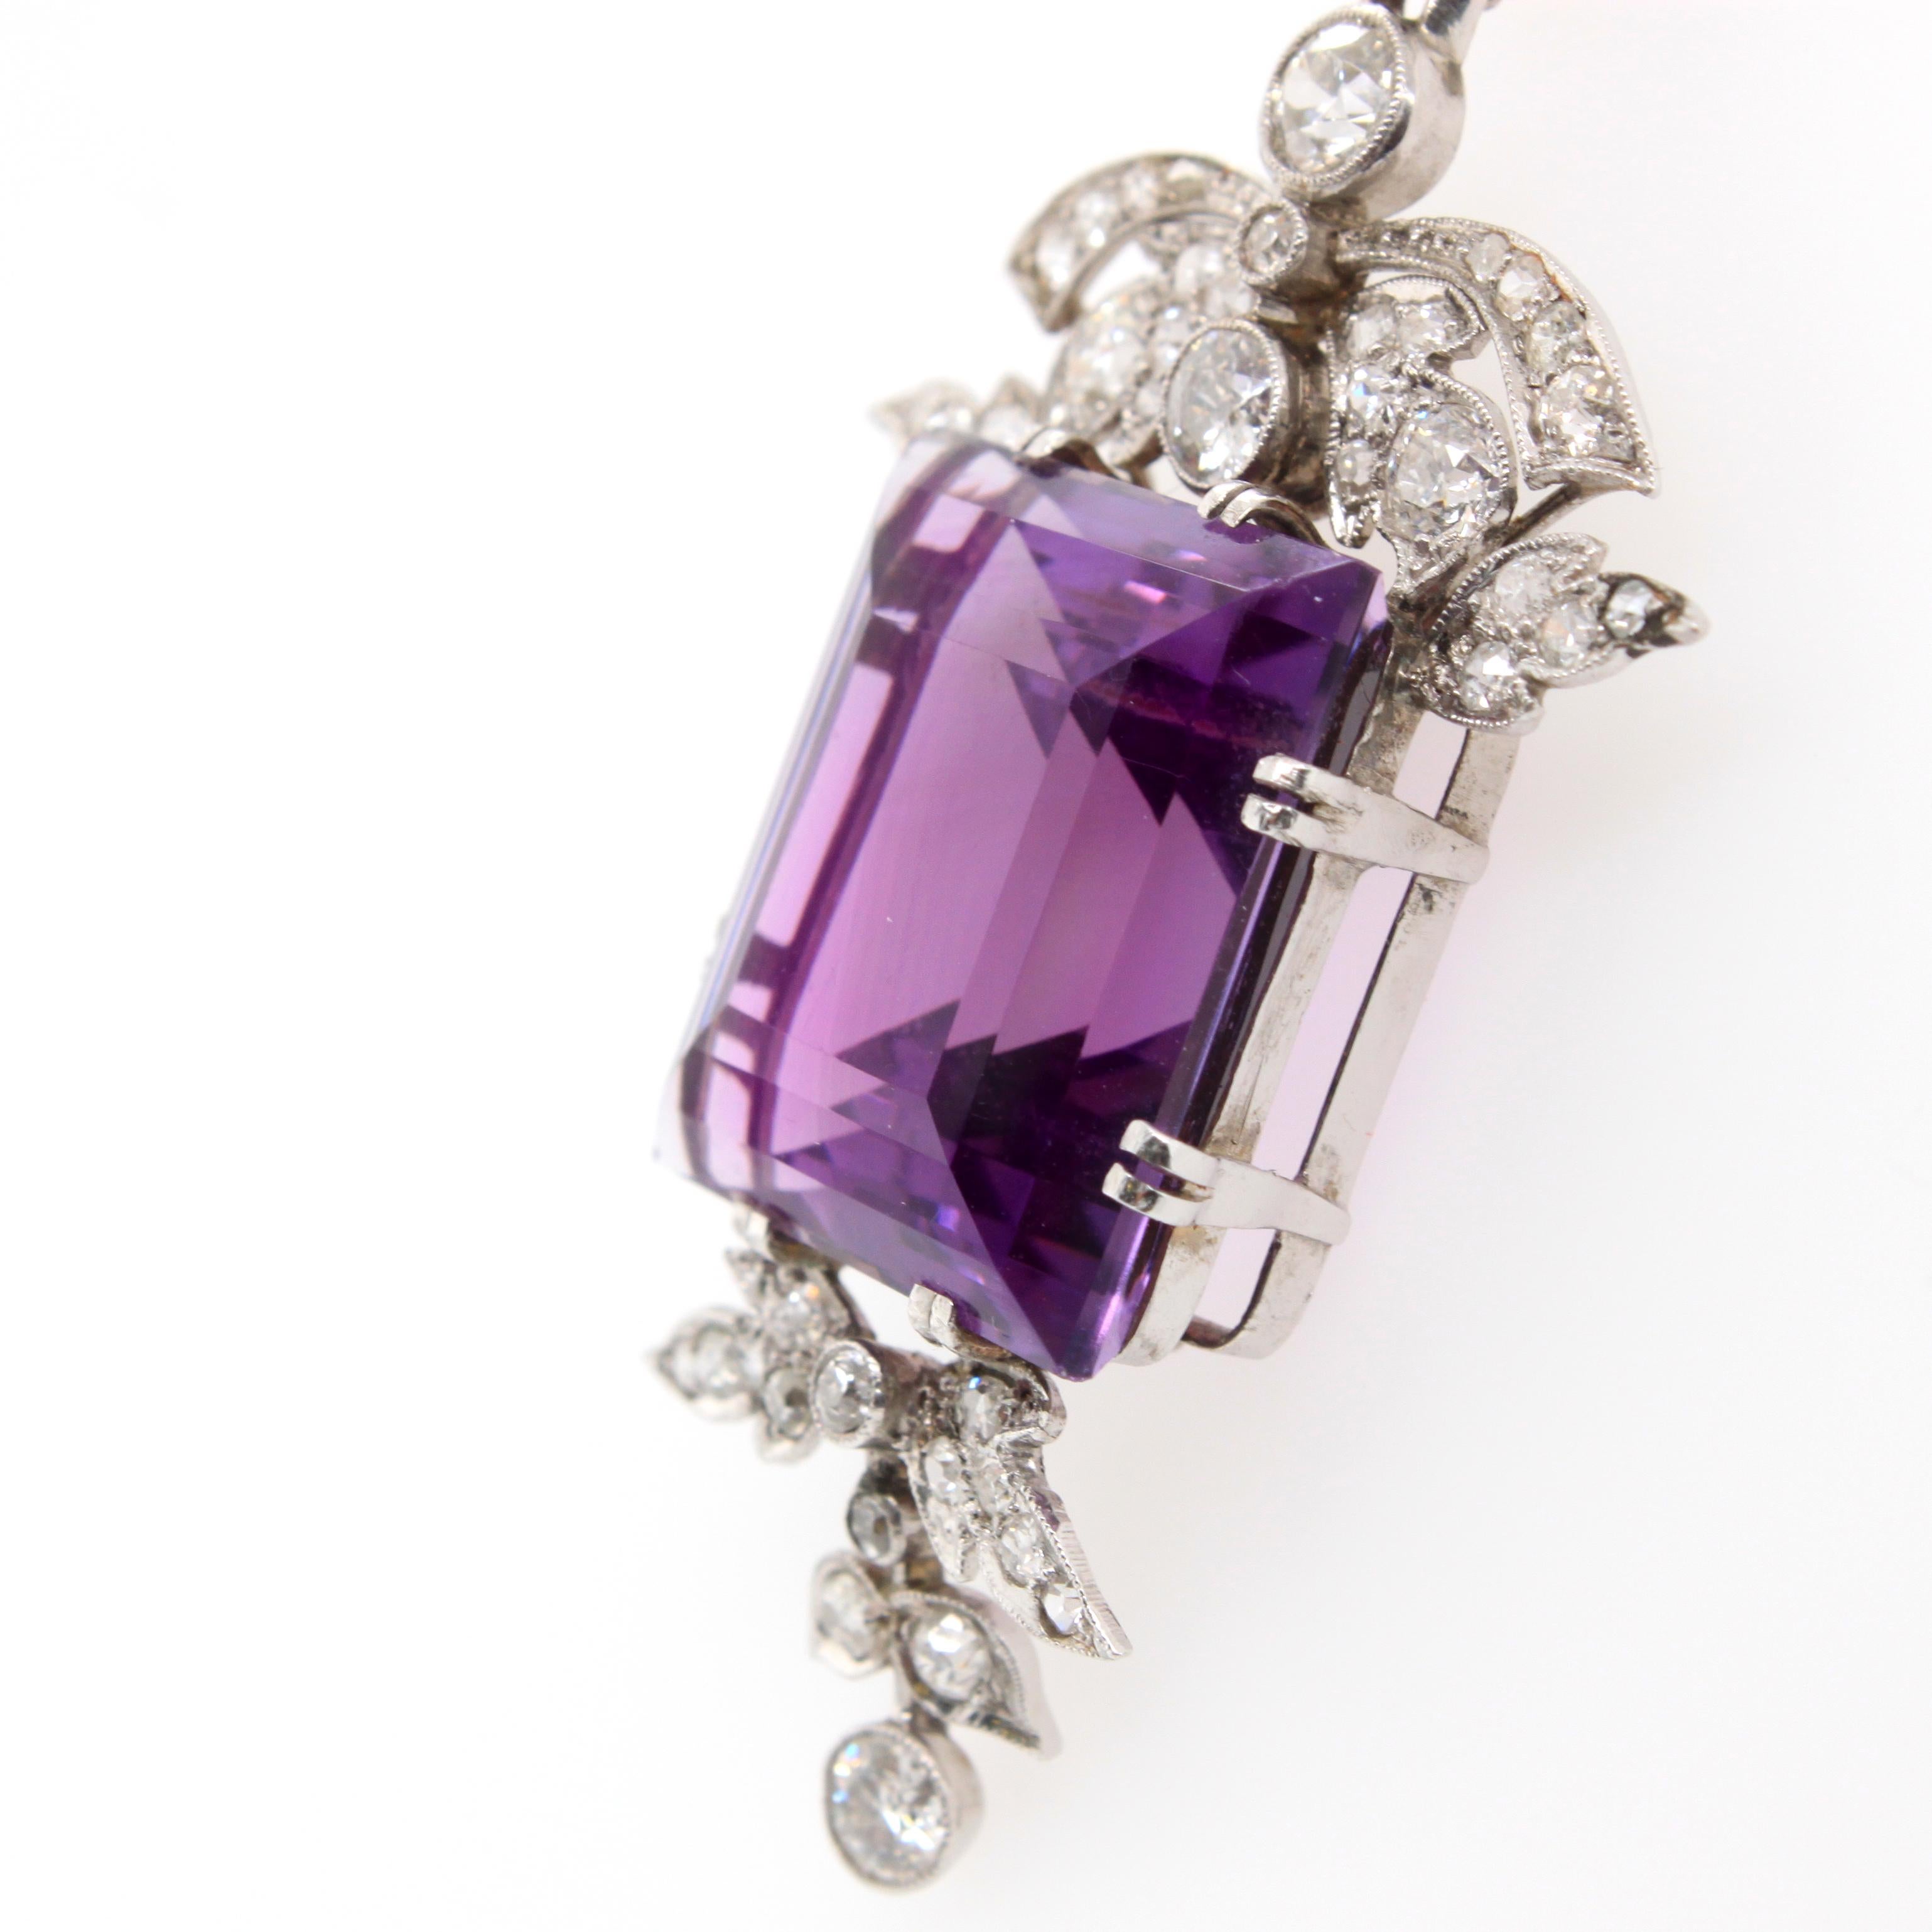 A puissant amethyst and diamond brooch/pendant, Art Deco, ca. 1930s. The square cut amethyst centres the jewel and has a deep Siberian purple colour, weighing approximately 20 carats. It is set between round brilliant cut diamonds in a floral motif.